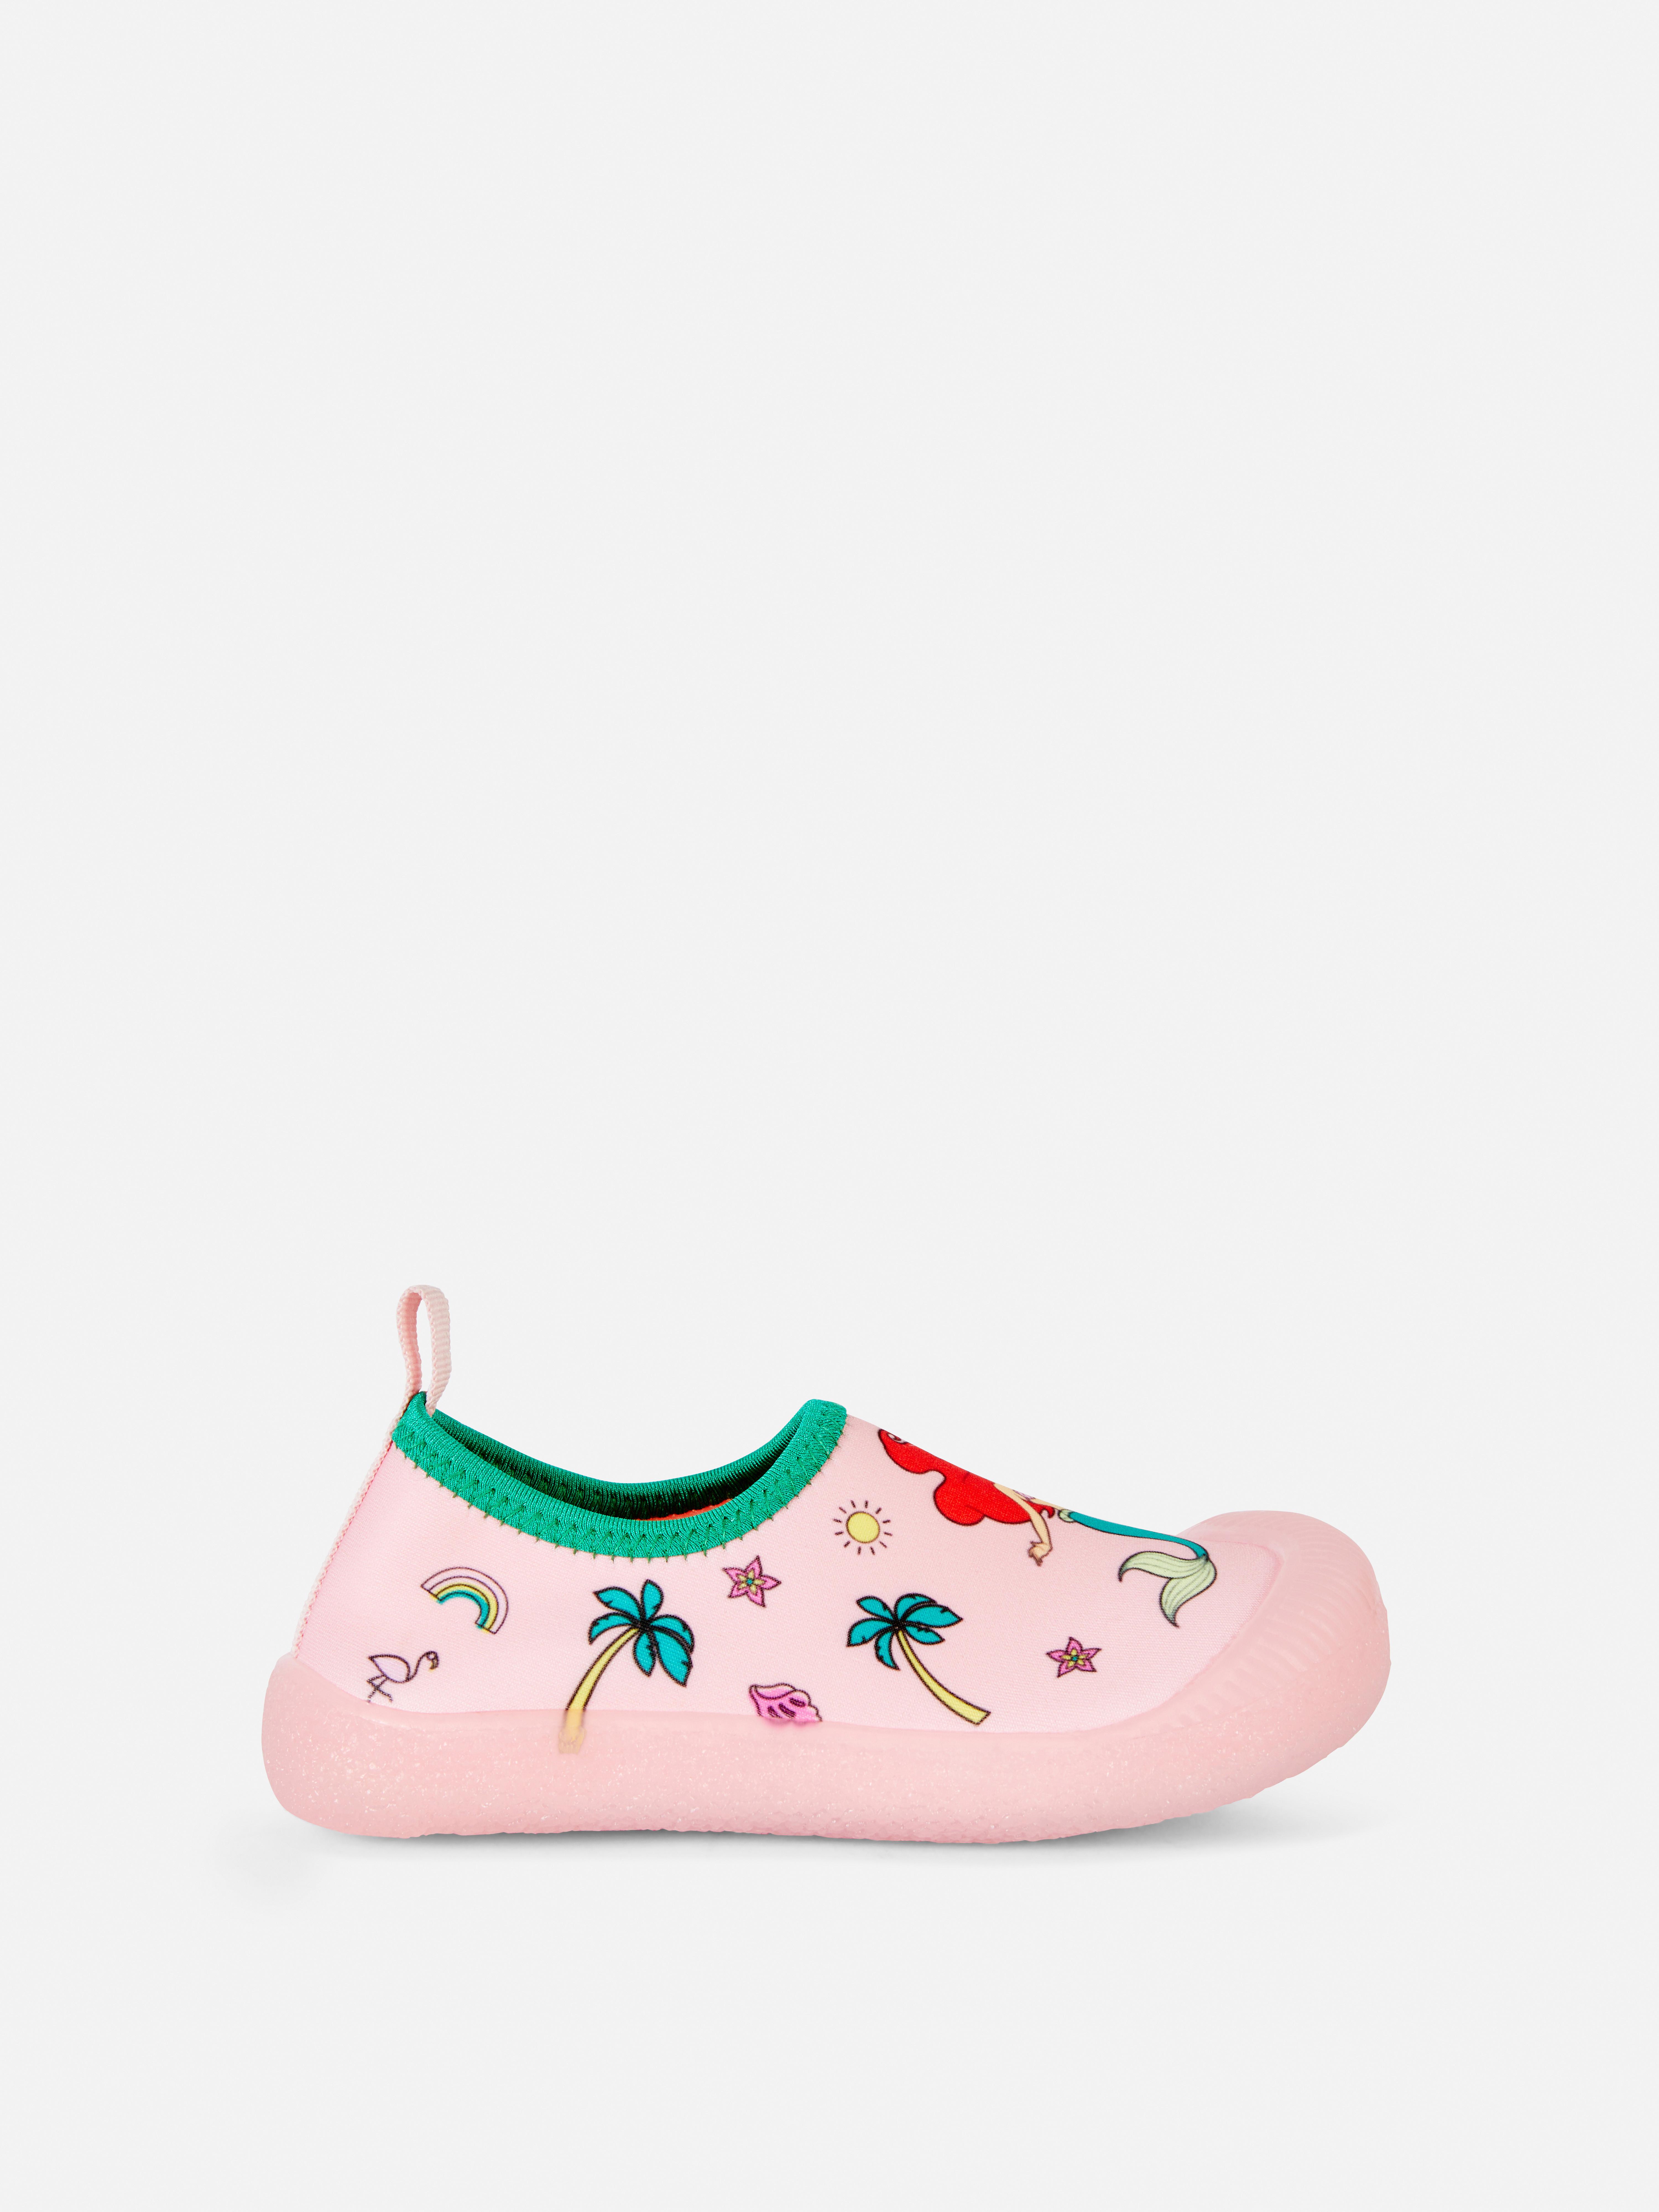 Disney's The Little Mermaid Water Shoes